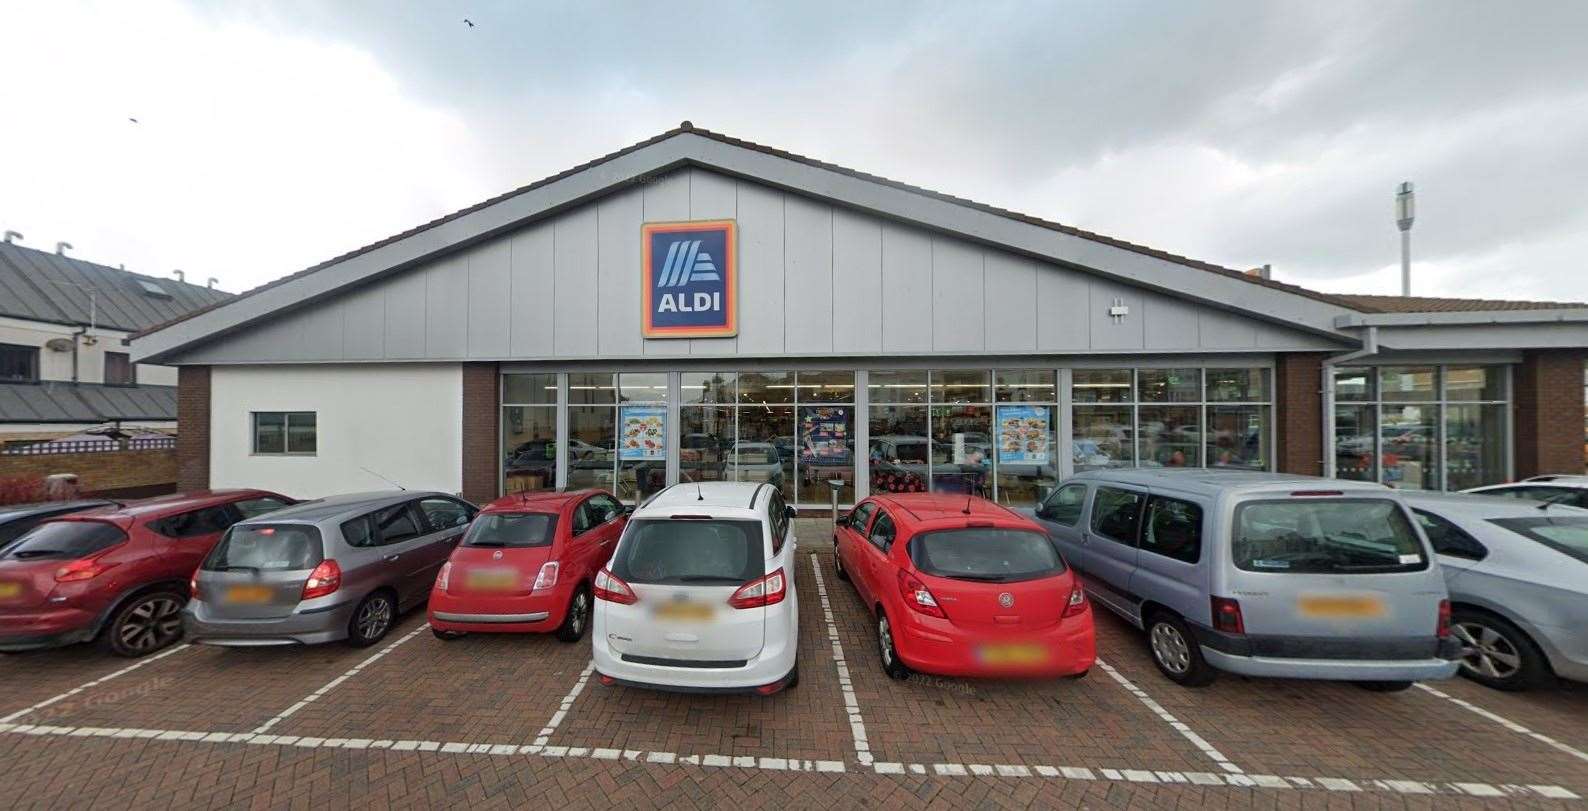 The Cliftonville Aldi will have a whole new layout when it reopens in March. Picture: Google Street View